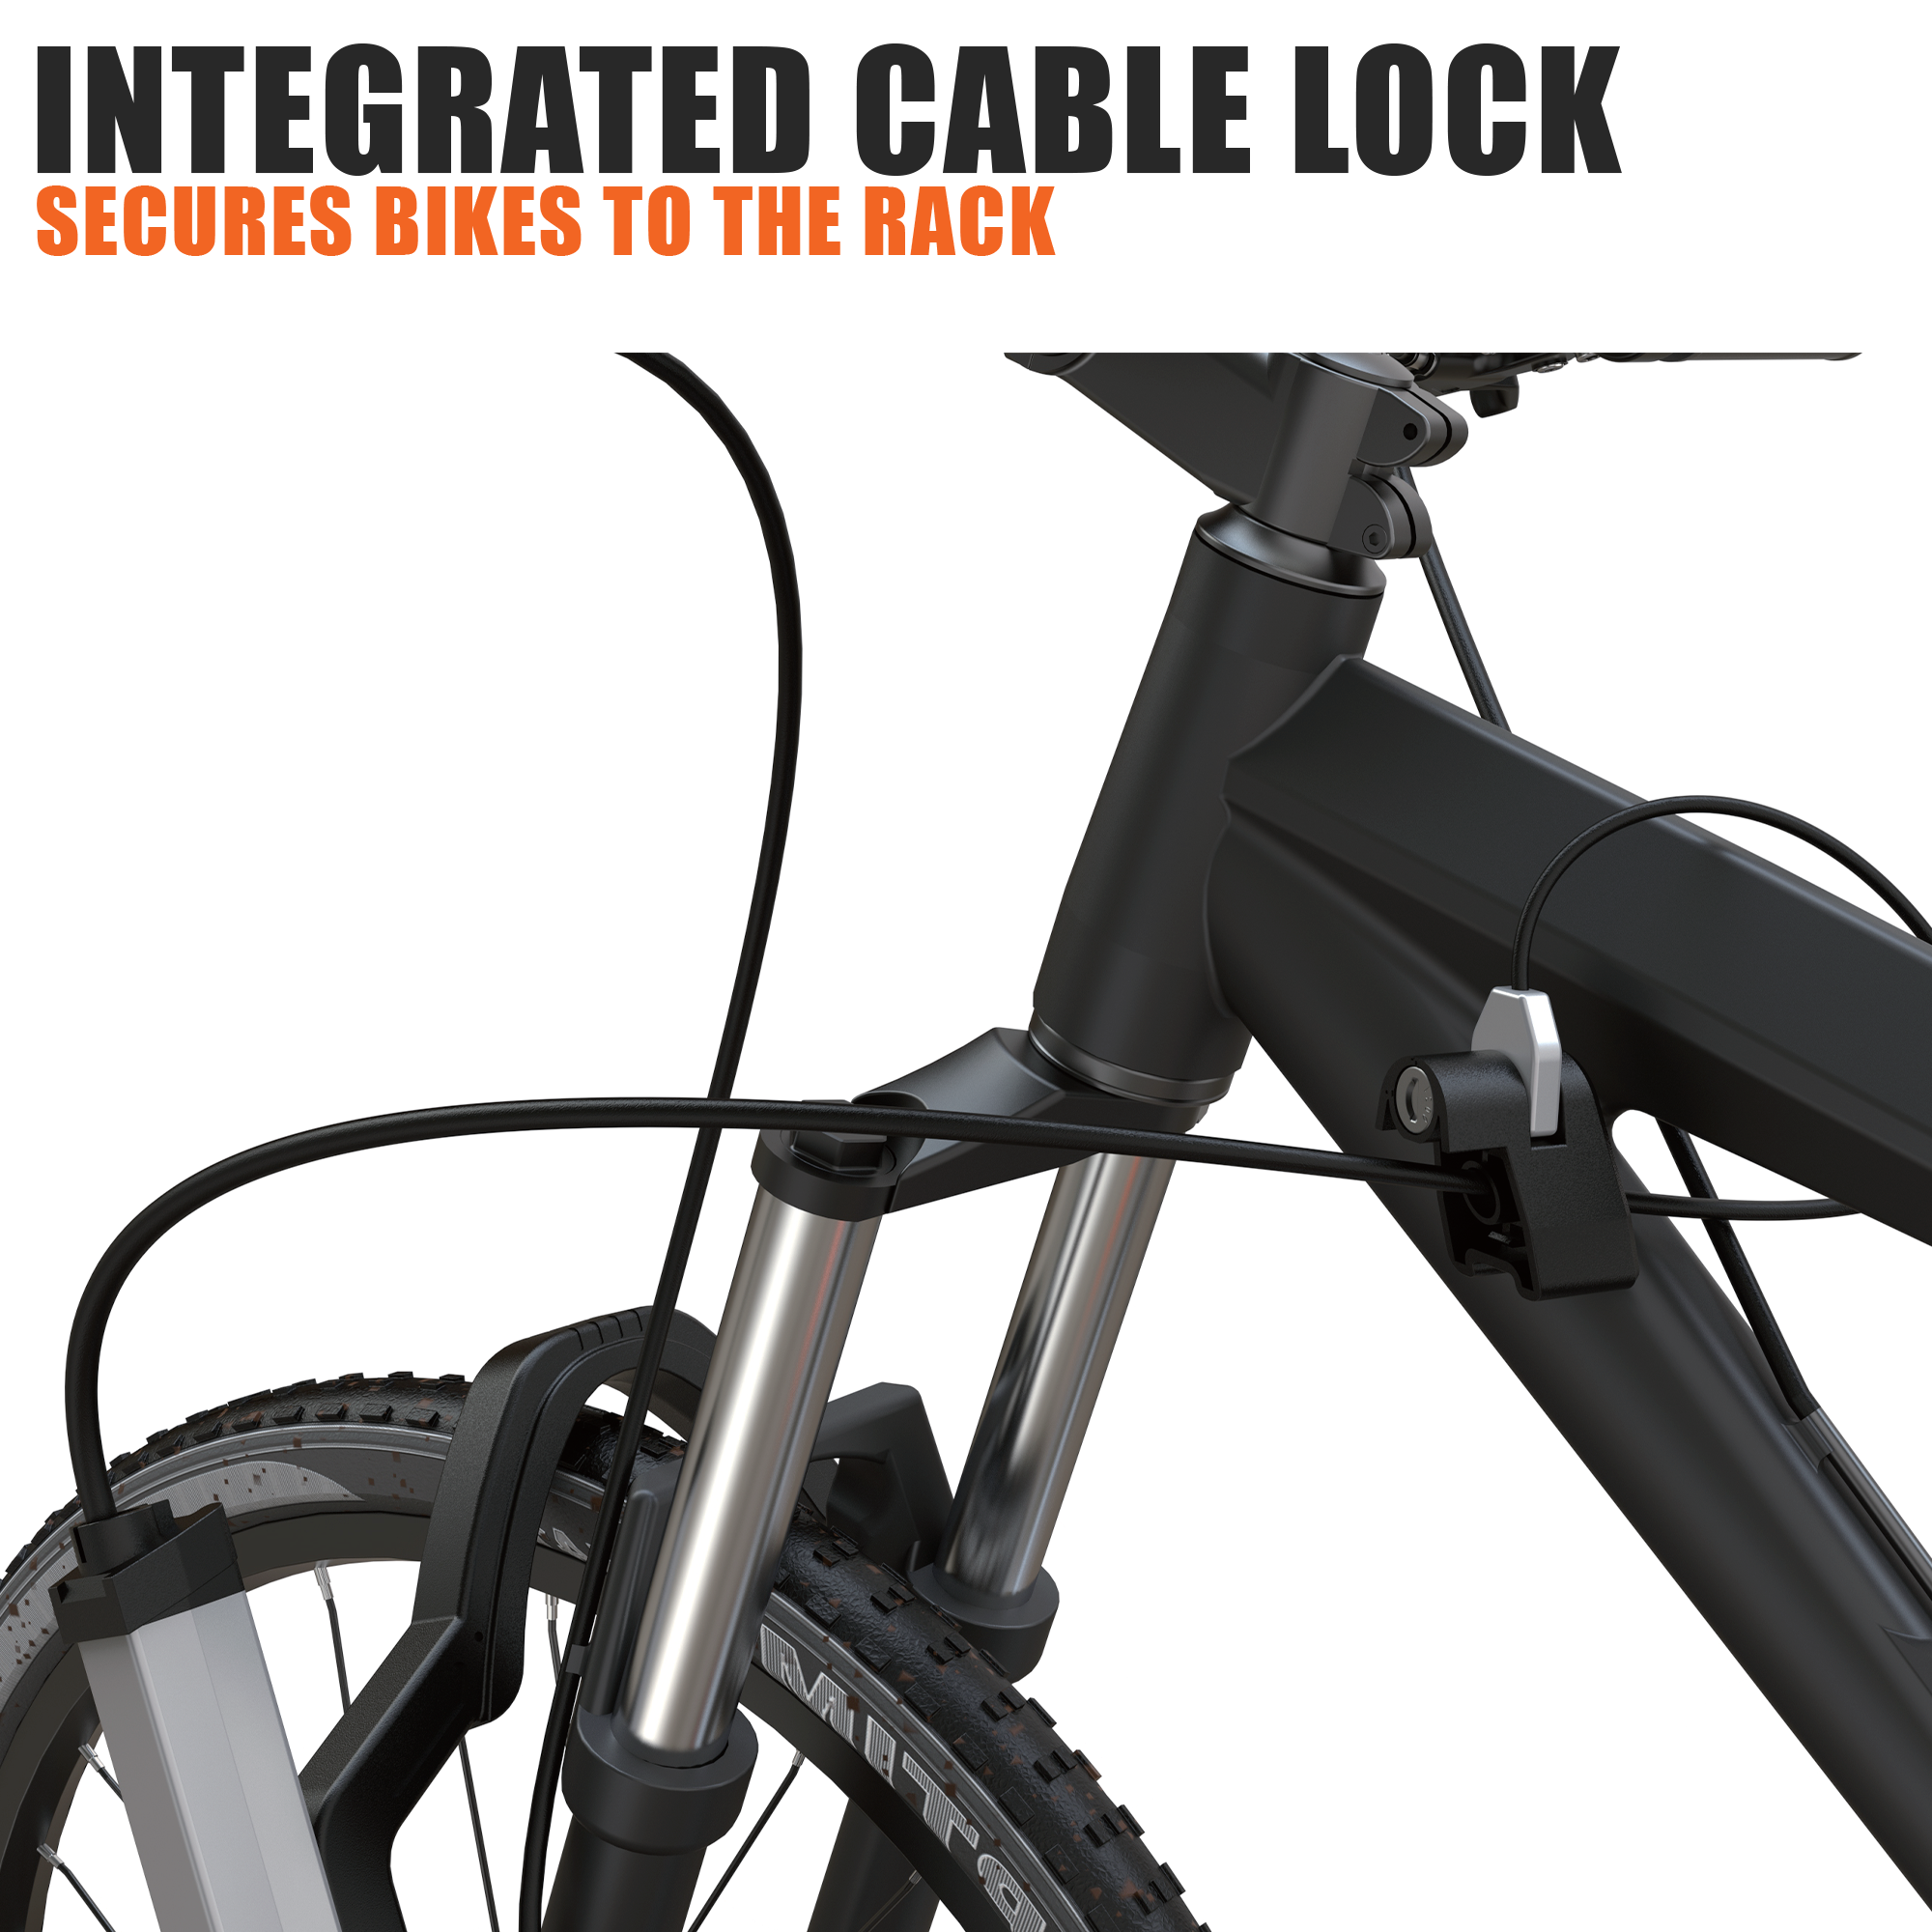 Hitch Rack Features an Integrated Cable Lock